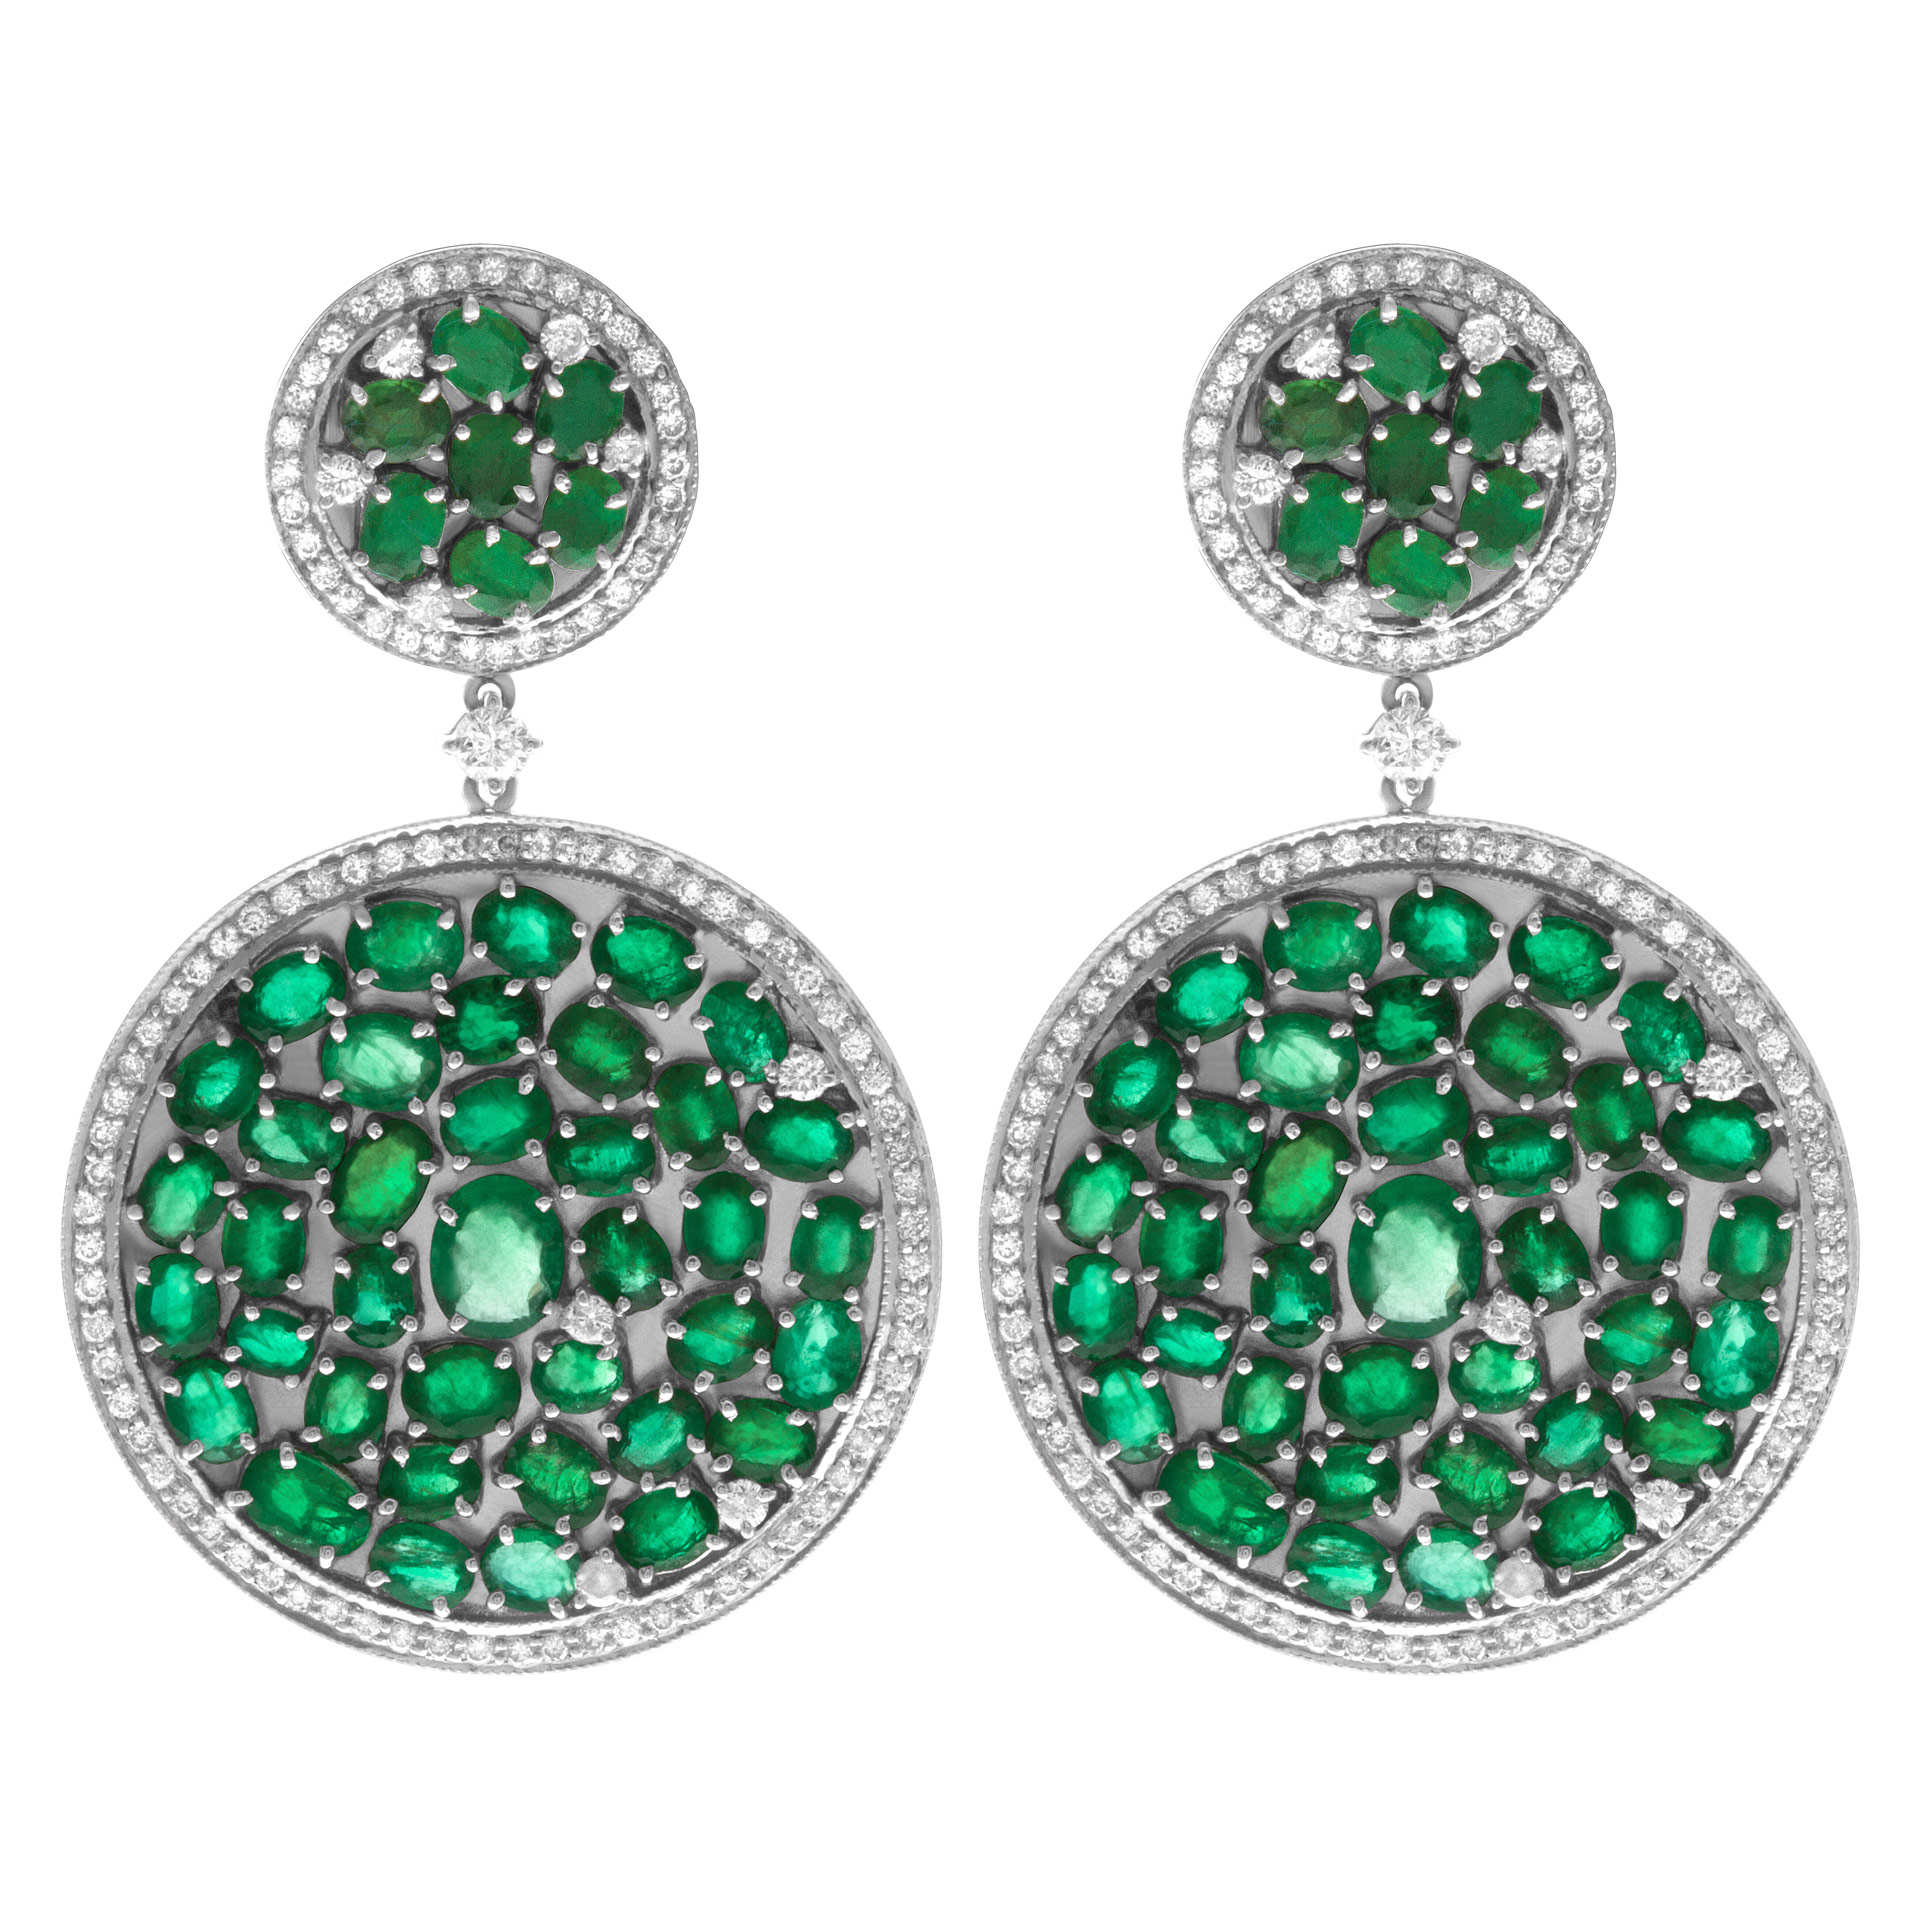 Elegant emerald earrings with diamond accents in 18k